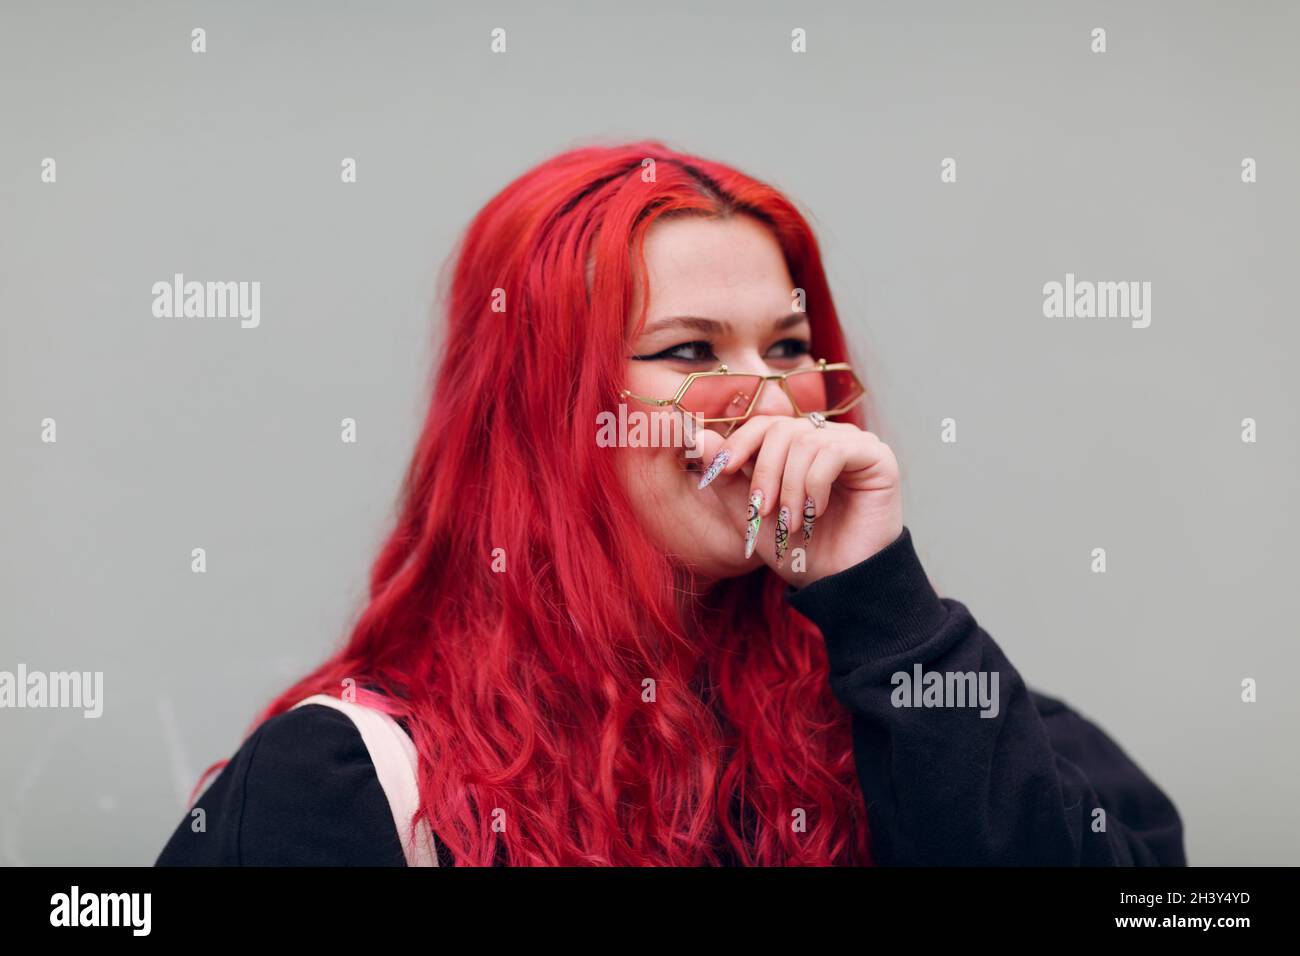 Plus size overweight fat body positive lgbtq woman with red hair and pink glasses Stock Photo